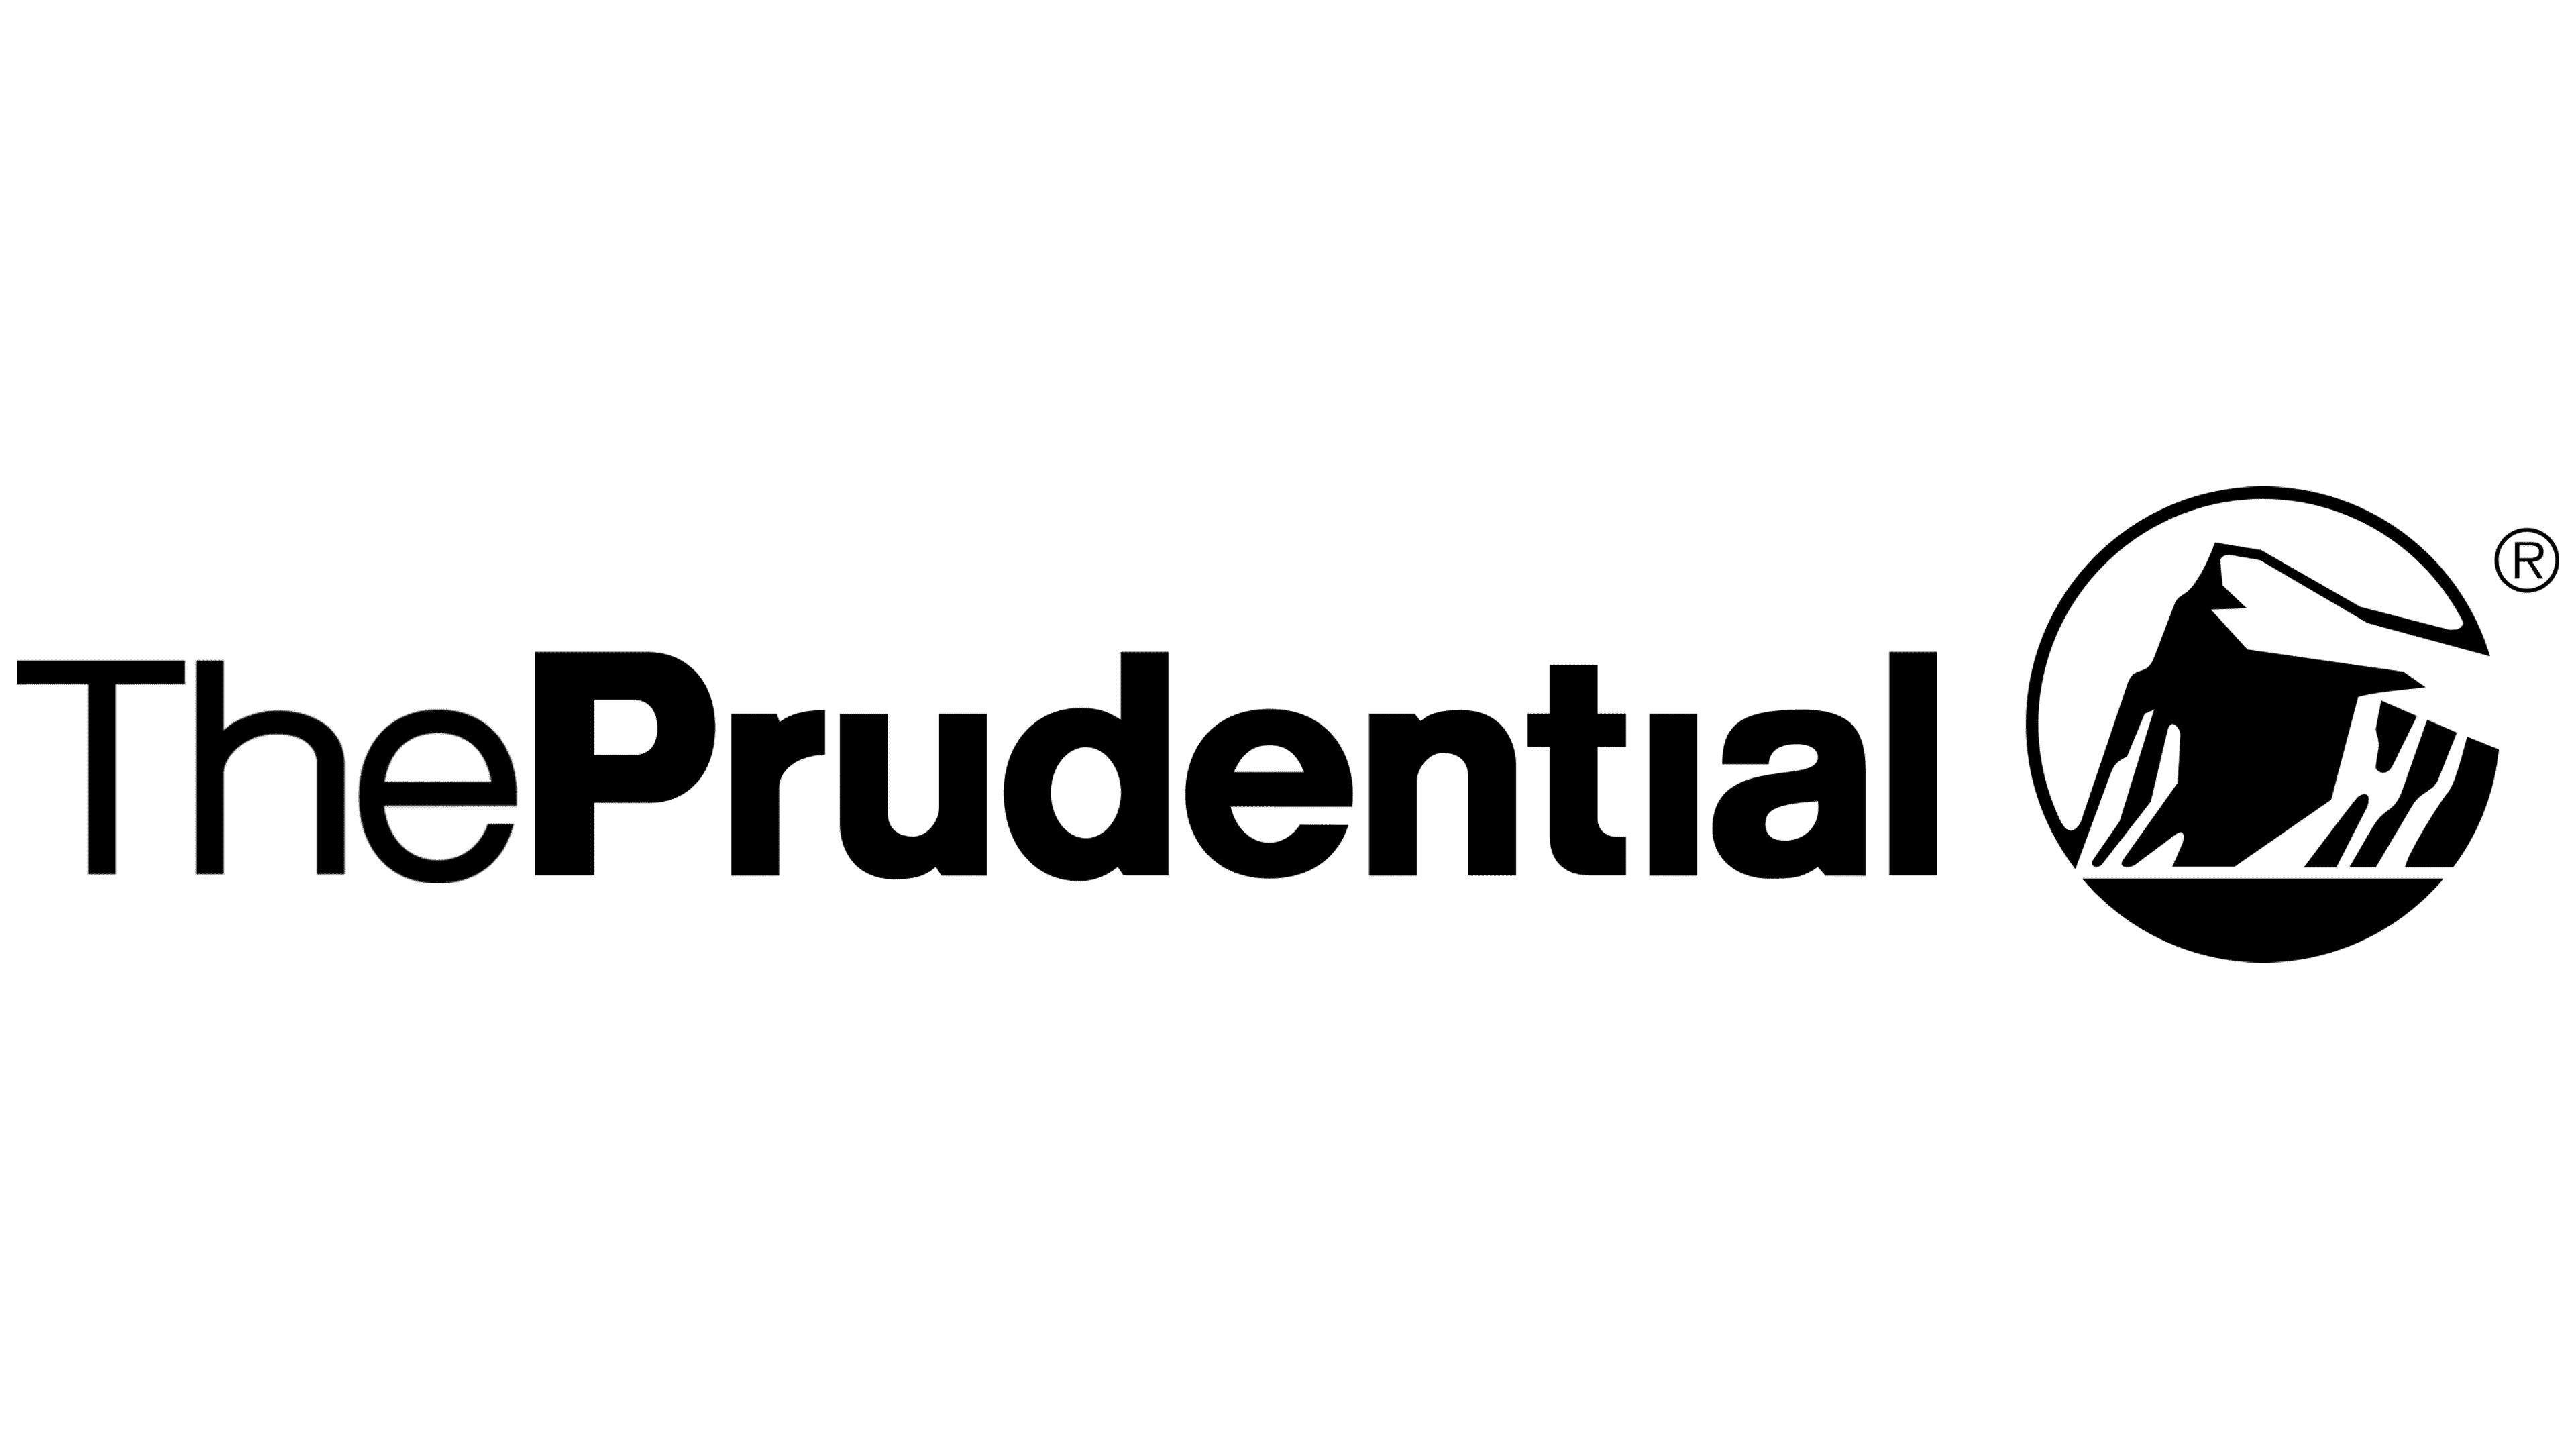 Prudential Financial Logo, symbol, meaning, history, PNG, brand